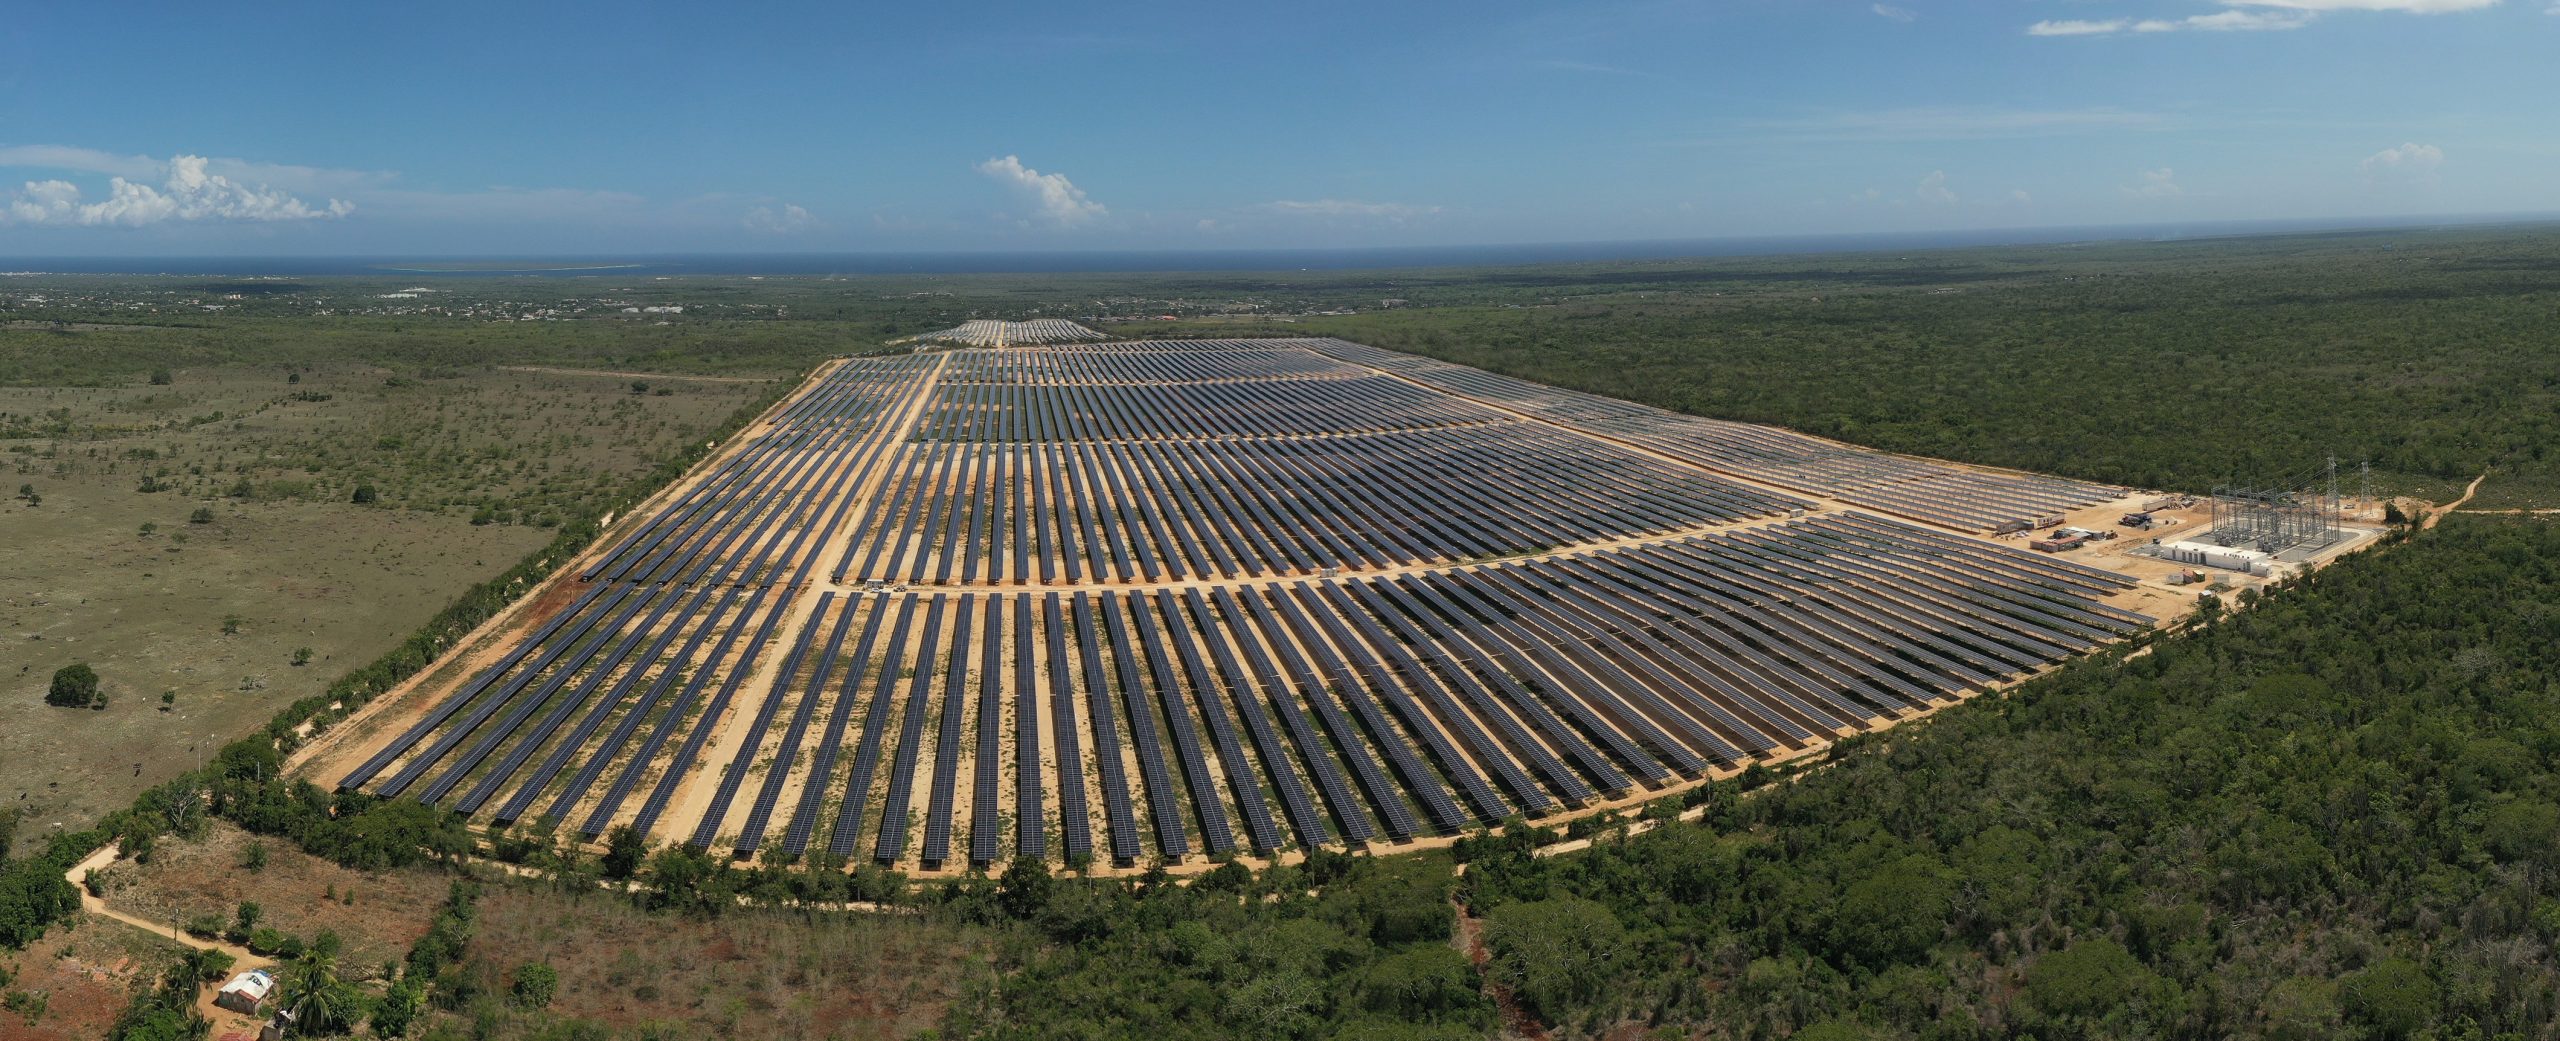 Ecoener to earn more than 250 million dollars with 97 MW in operation in the Dominican Republic